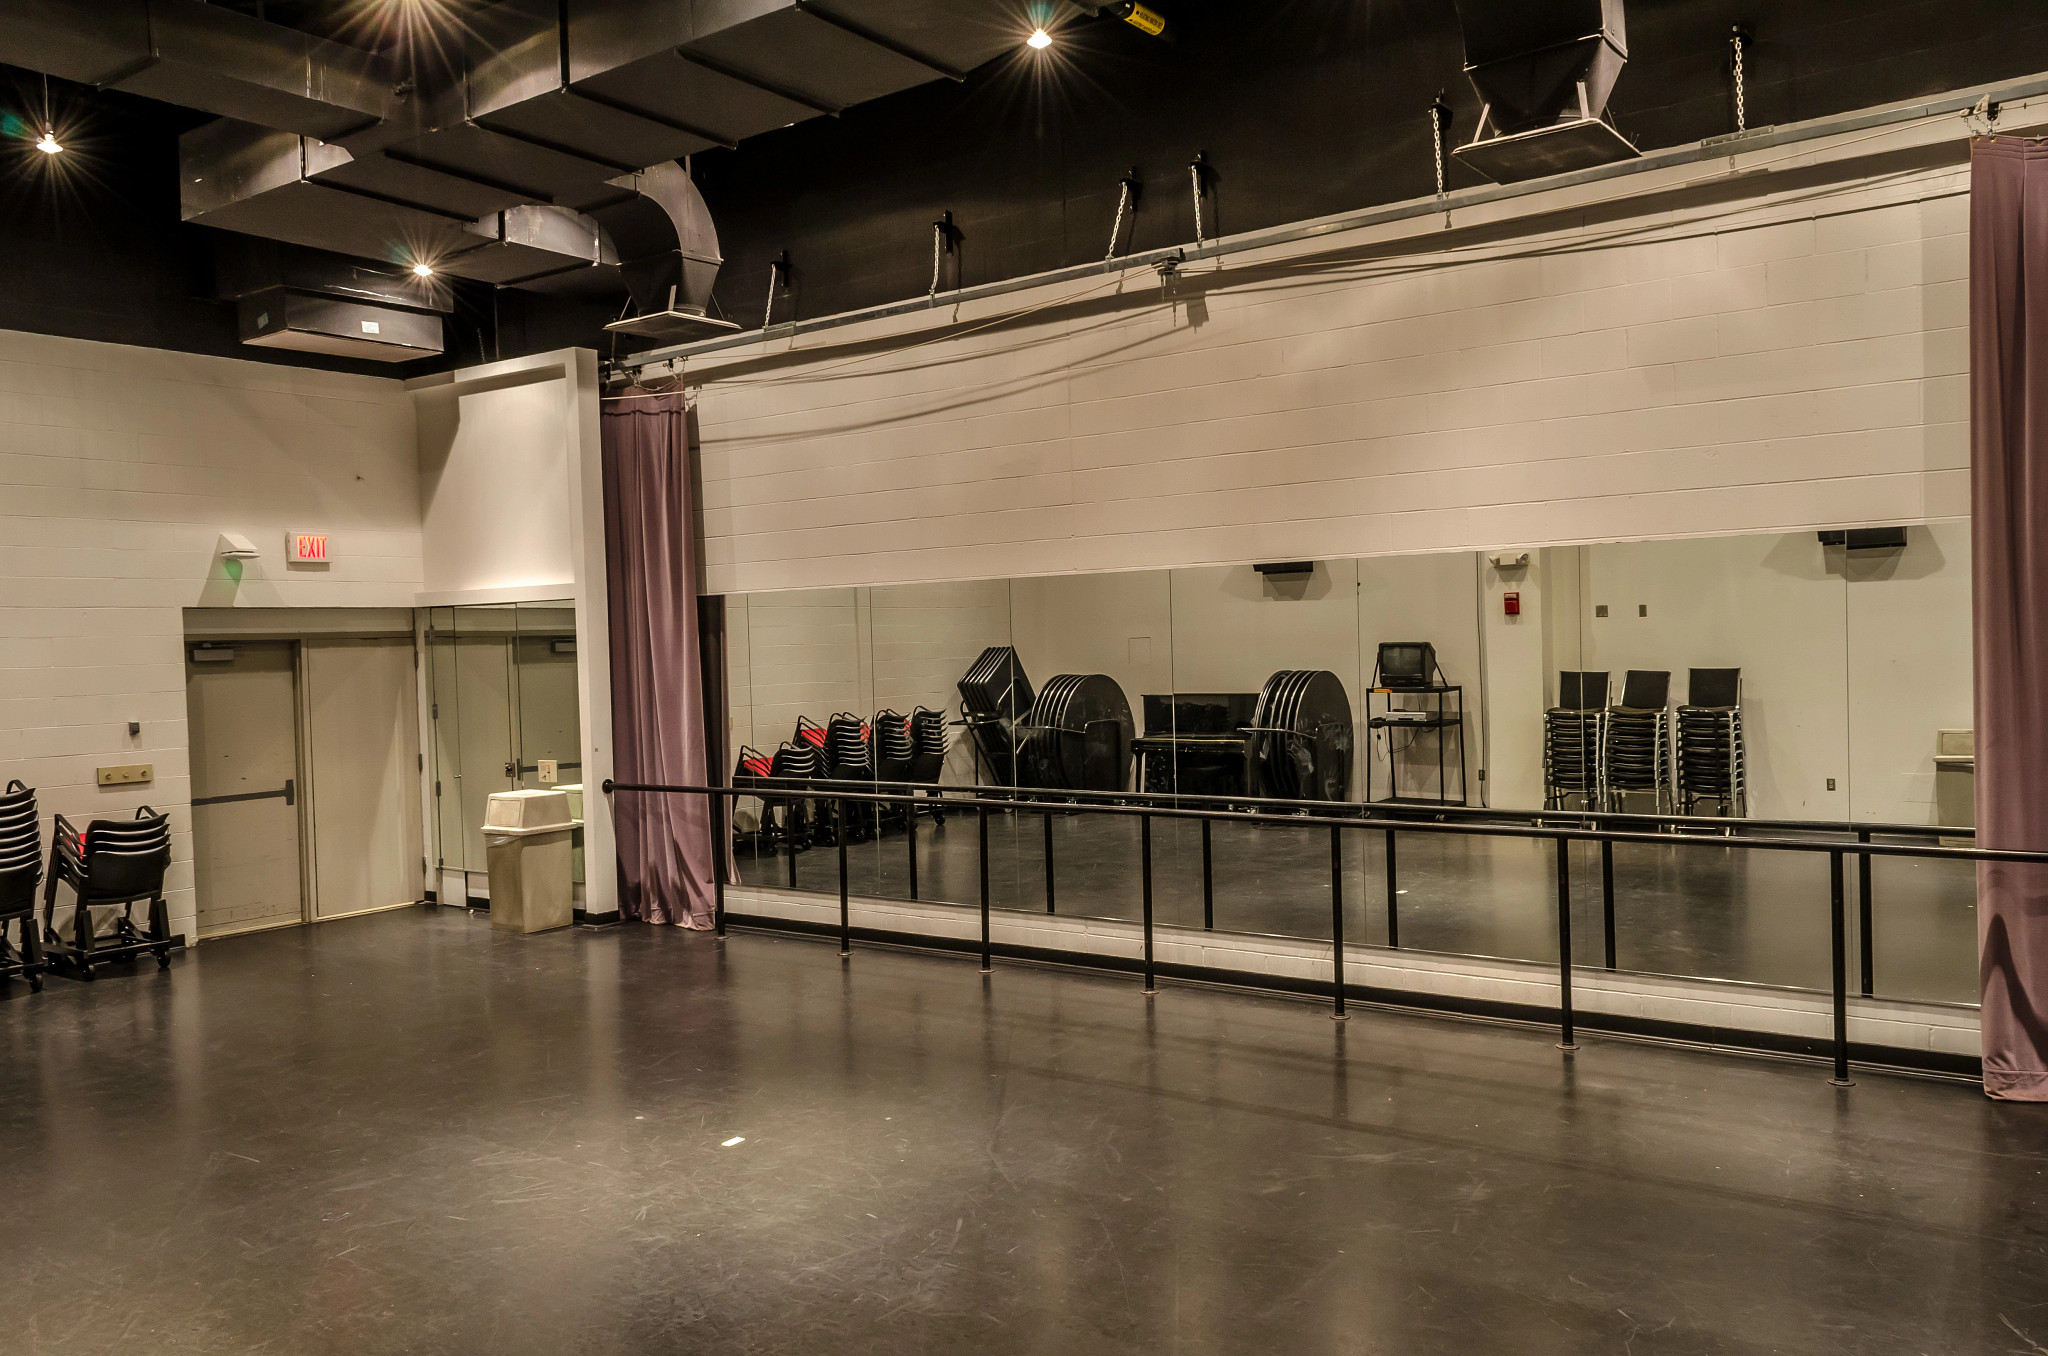 Dance studio with large mirrors and a ballet bar on the wall